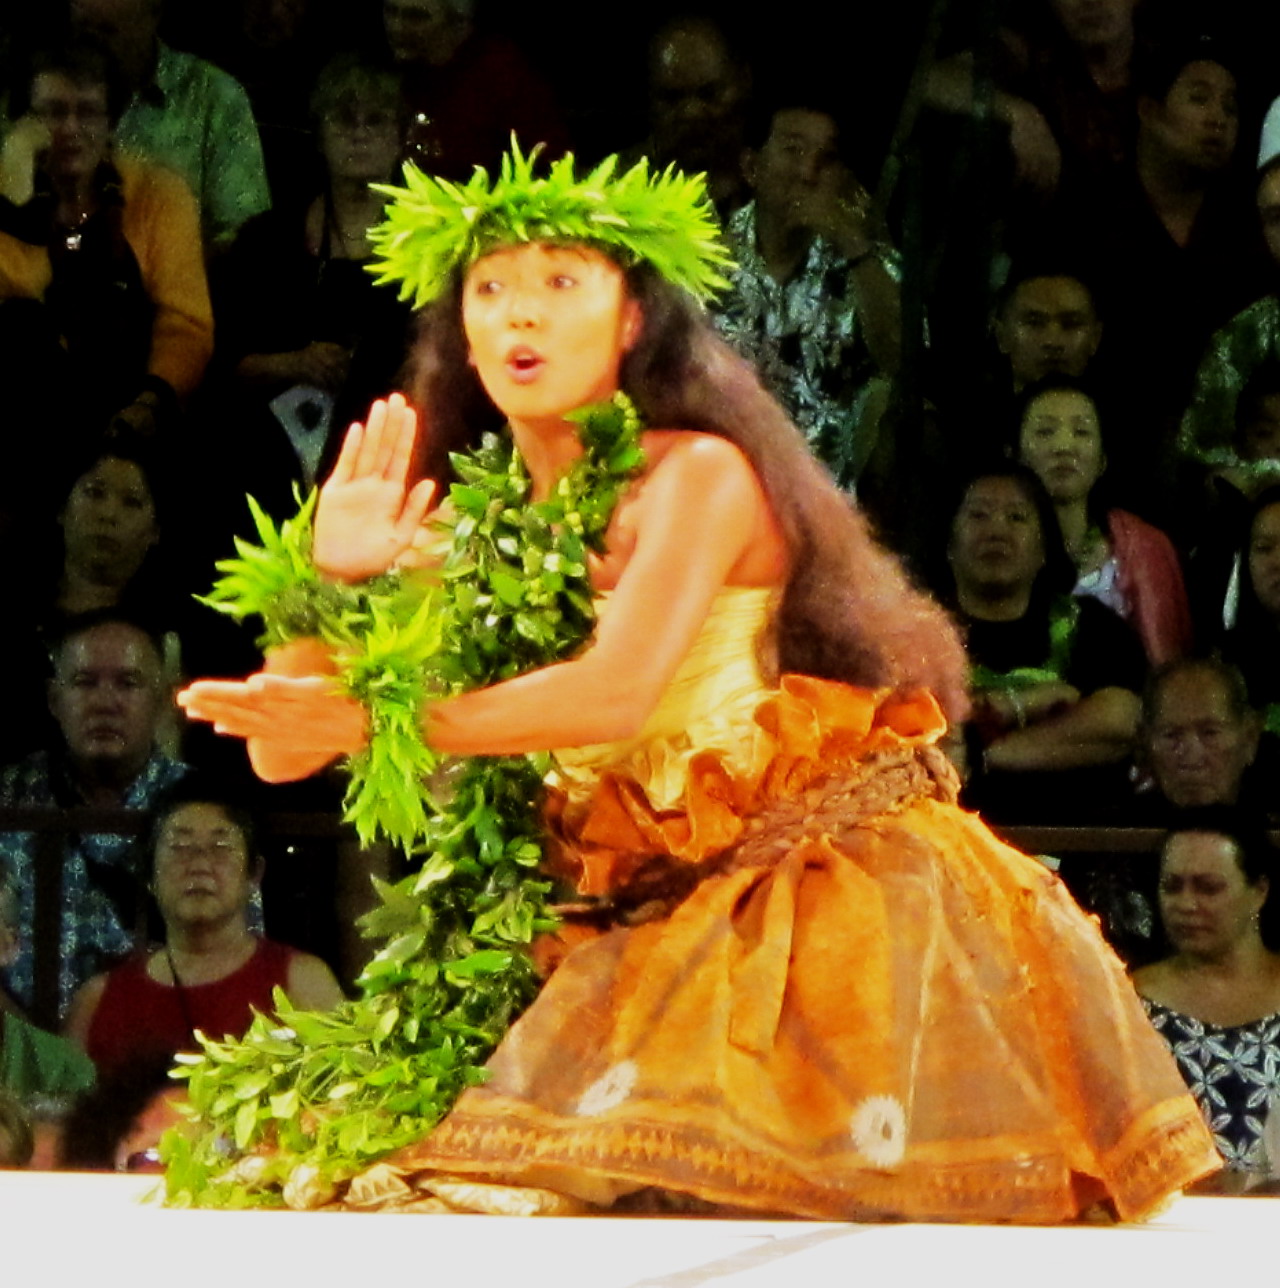 The 50th State - Life, Photos & Thoughts: Merrie Monarch Festival ...